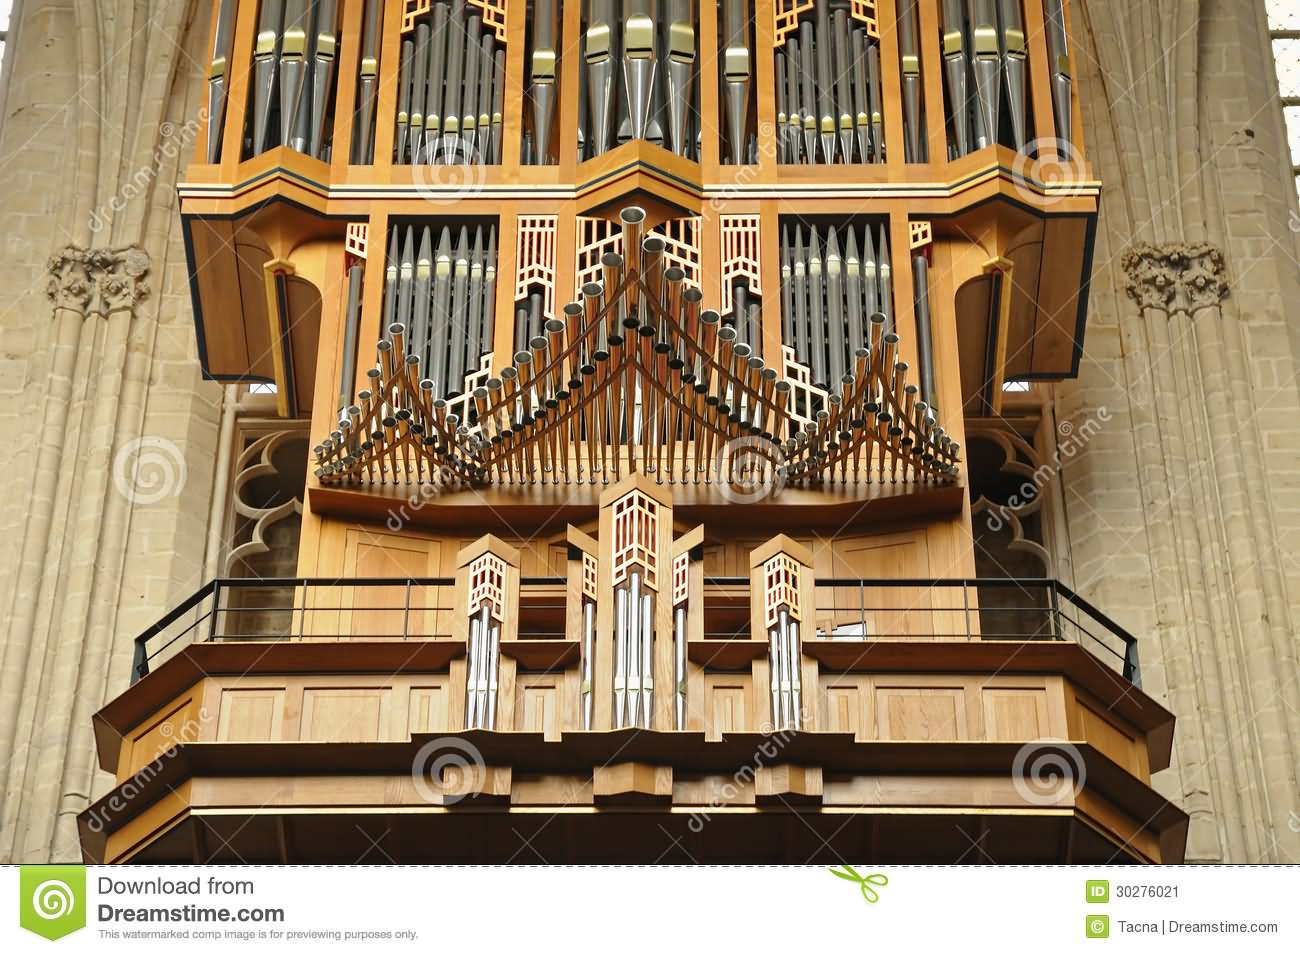 Closeup Of Pipe Organ Inside The Cathedral of St. Michael and St. Gudula